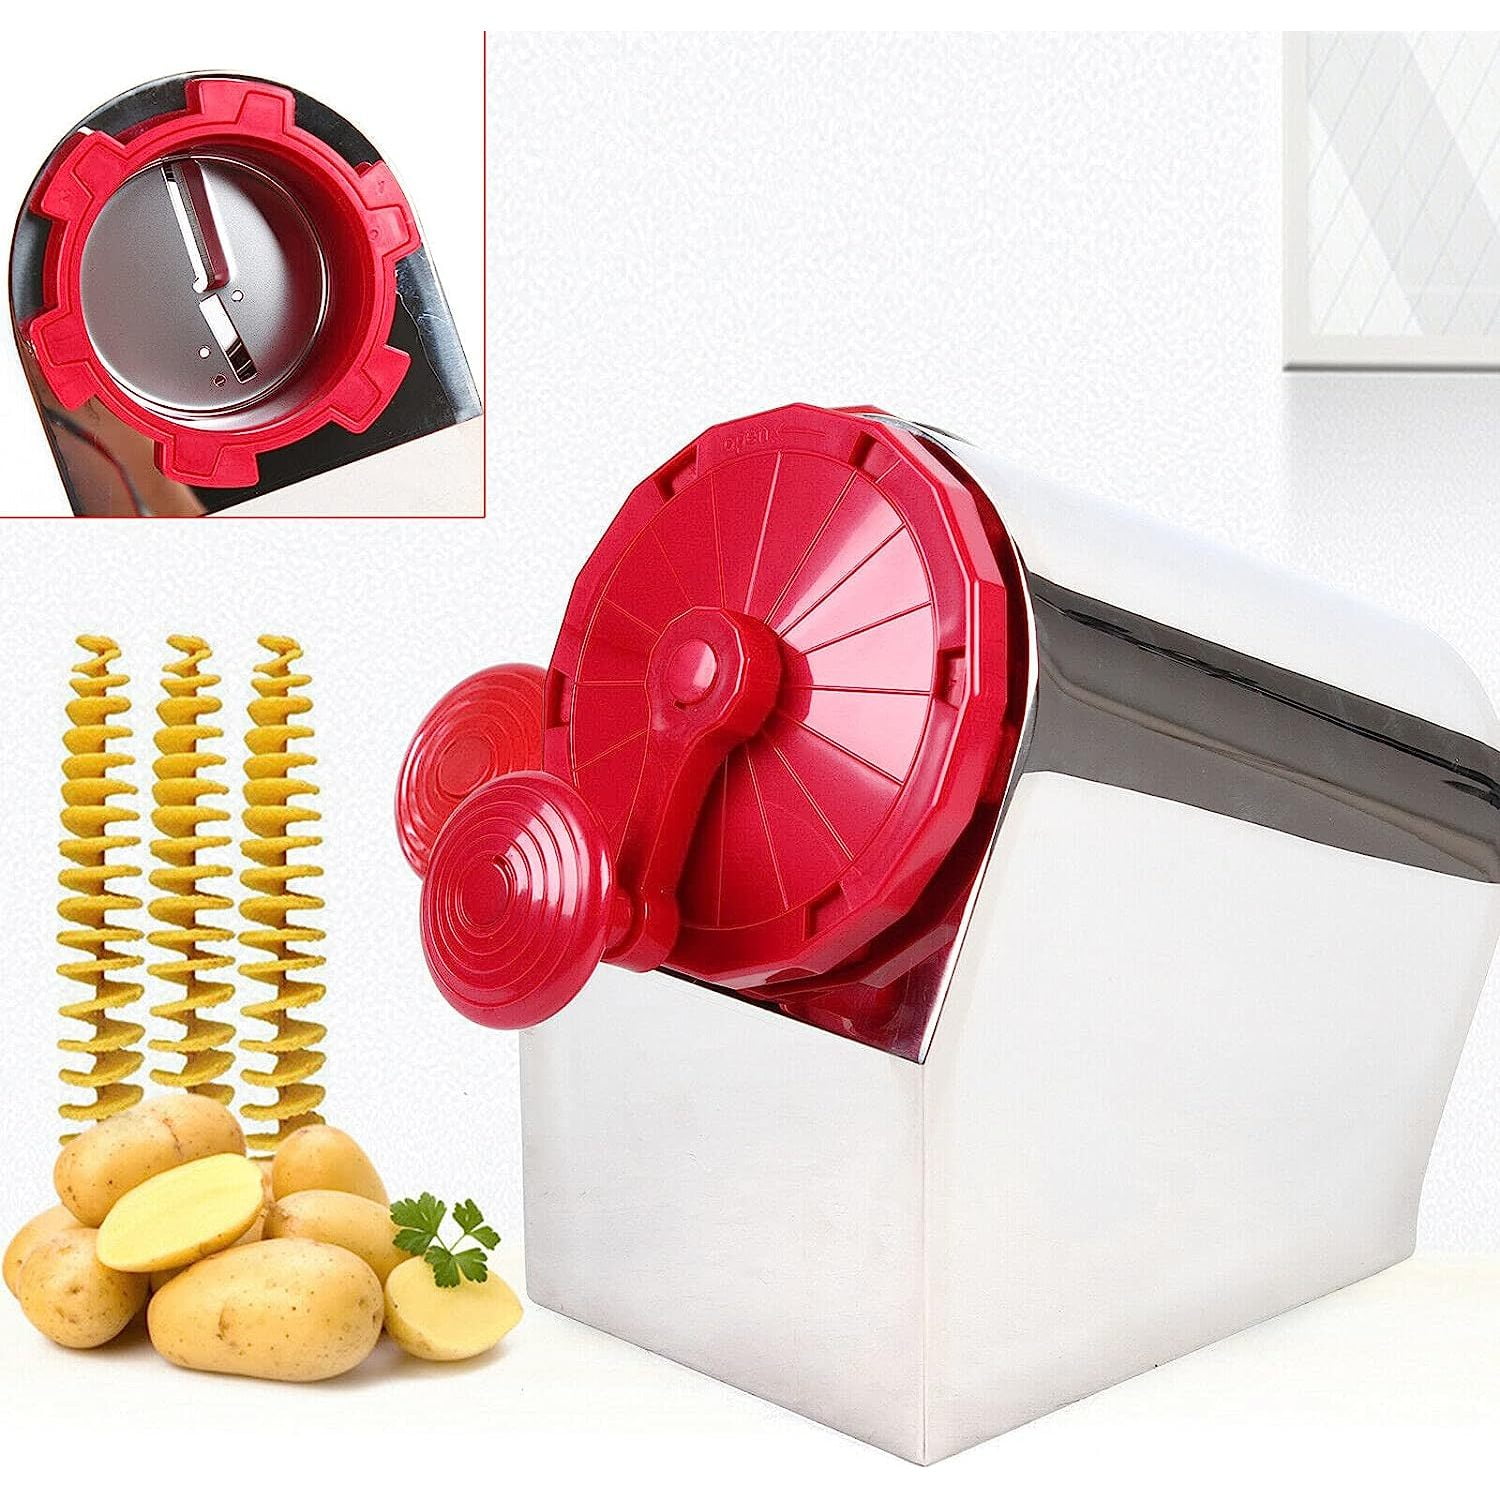 CGOLDENWALL 3 in 1 Manual Tornado Potato Slicer Spiral Potato Cutter  Twisted Potato Slicer Spiral Twister Cutter Thicker Stainless Steel  Vegetables